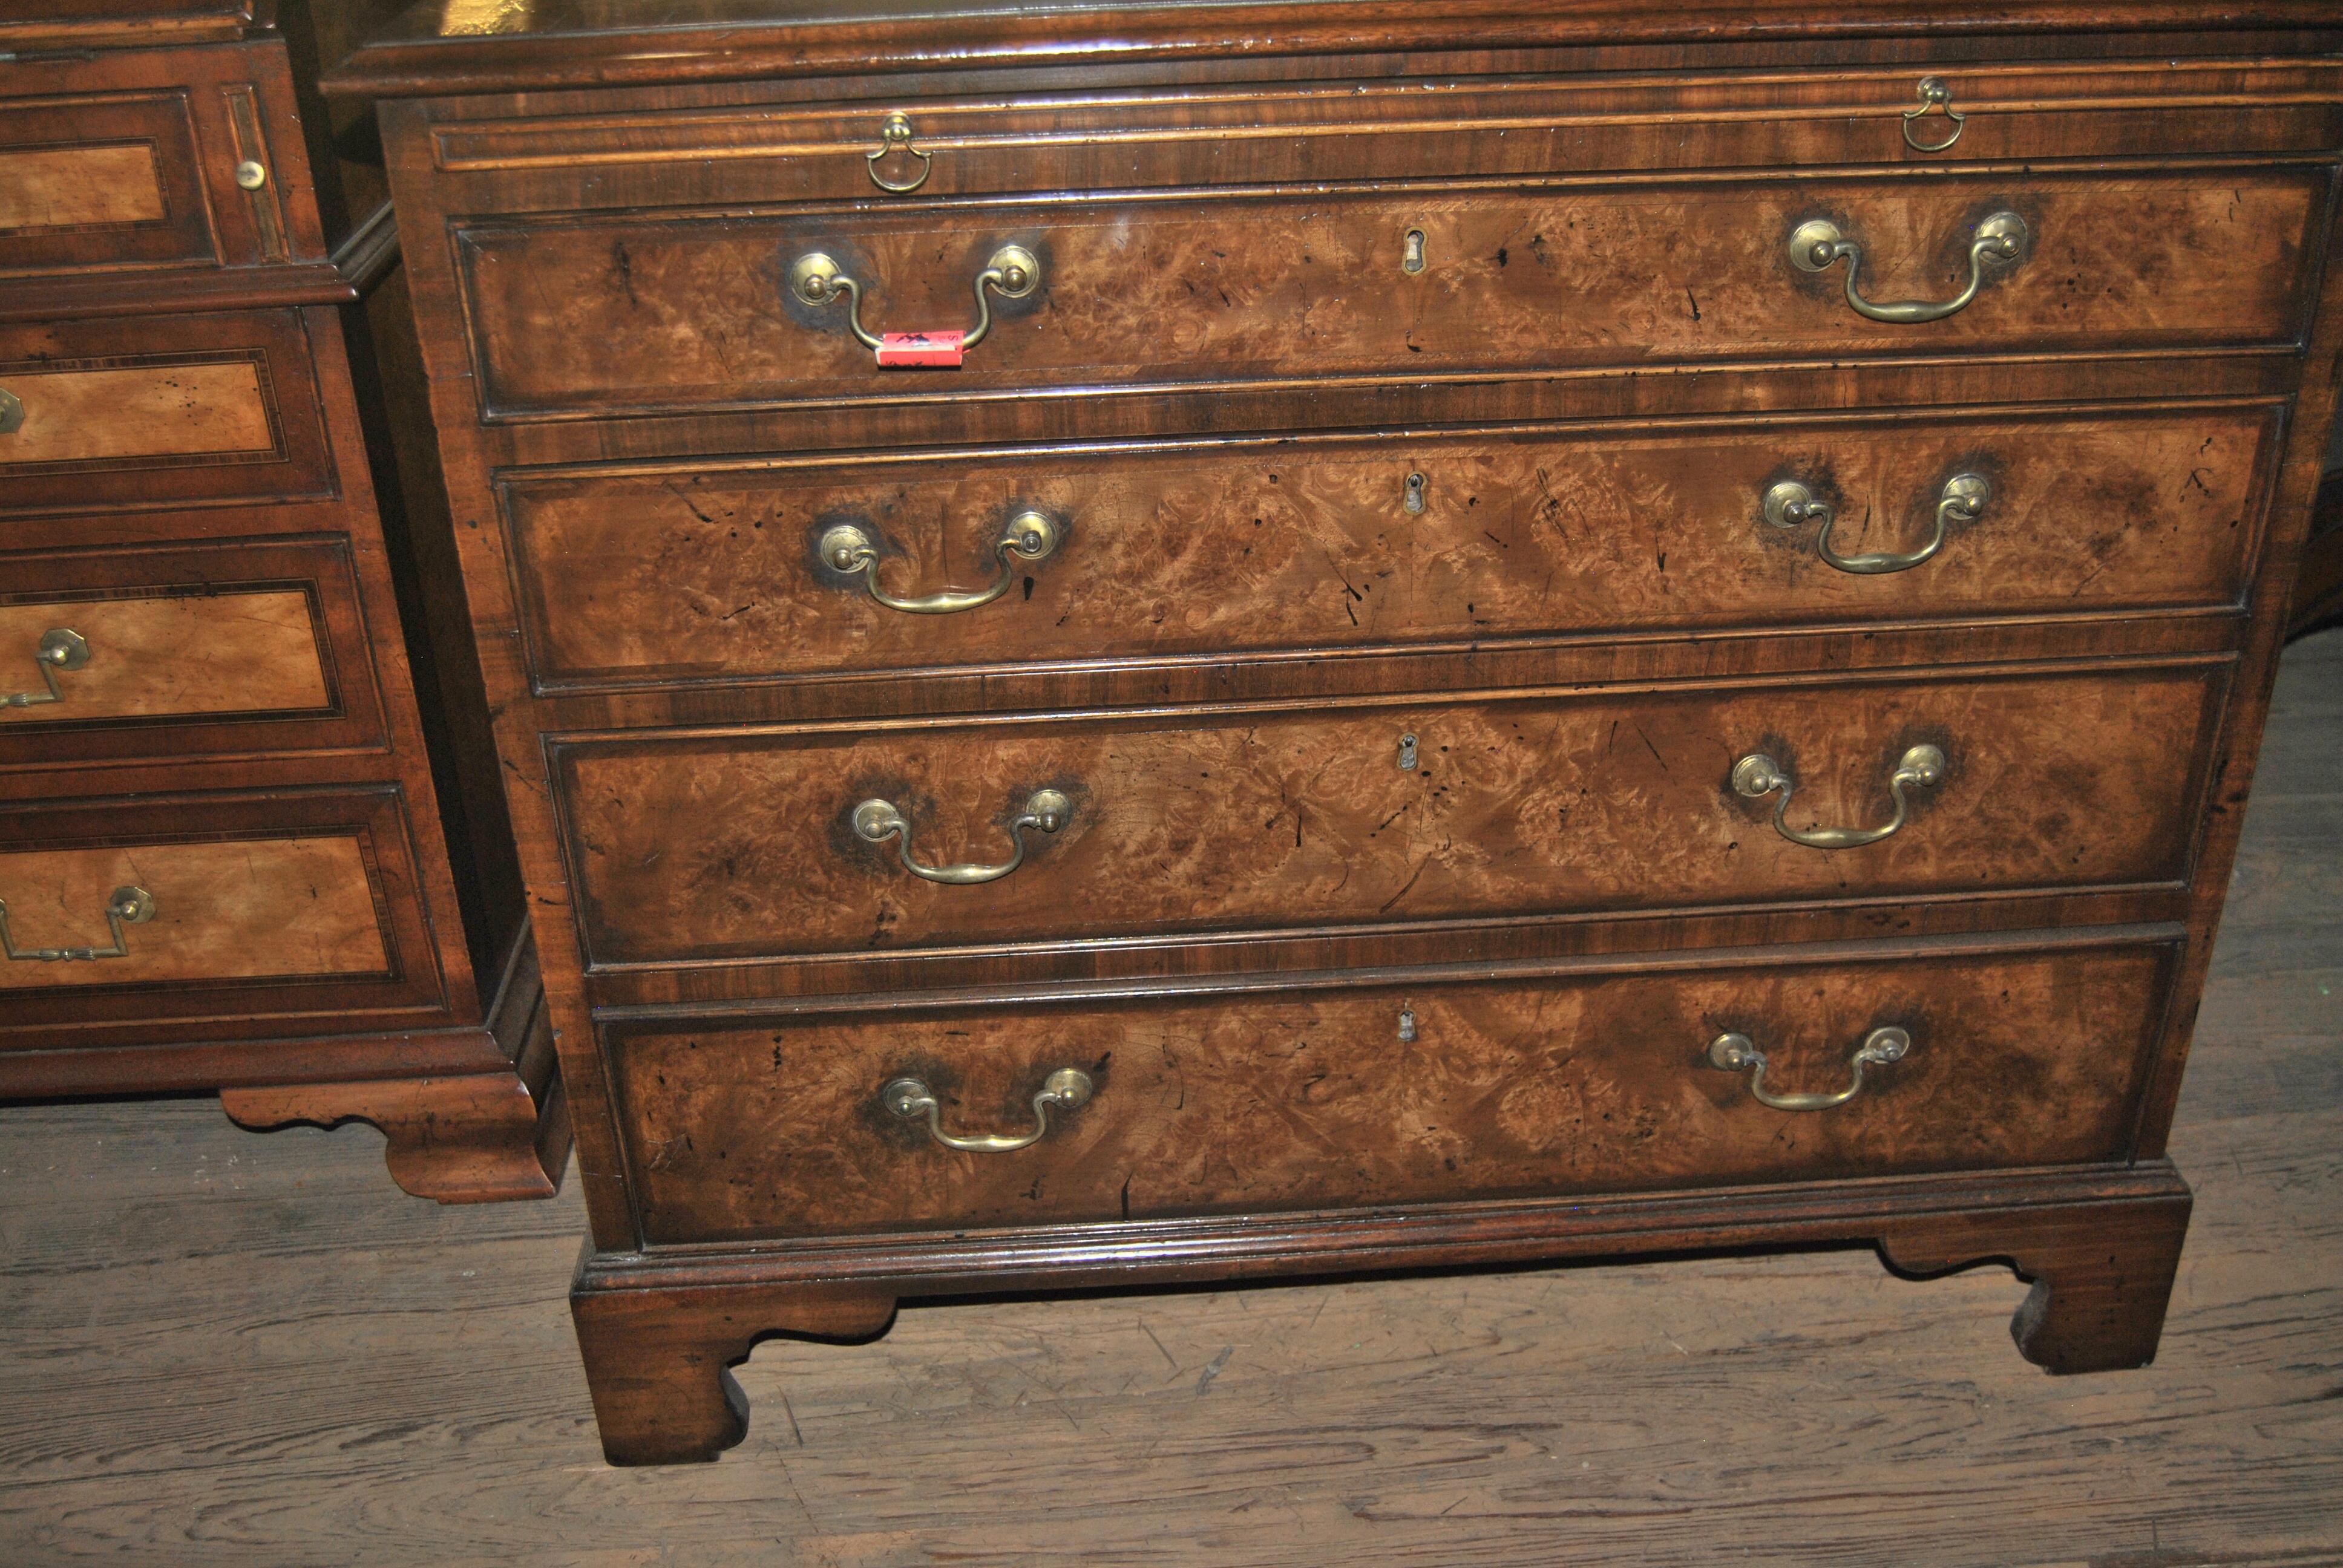 This is a walnut and Kashmir walnut chest of drawers / dresser made in England, circa, 1825. The top and both right and left sides are banded in walnut, followed by a Herringbone walnut inlay with Kashmir walnut to the middle. Kashmir walnut is the